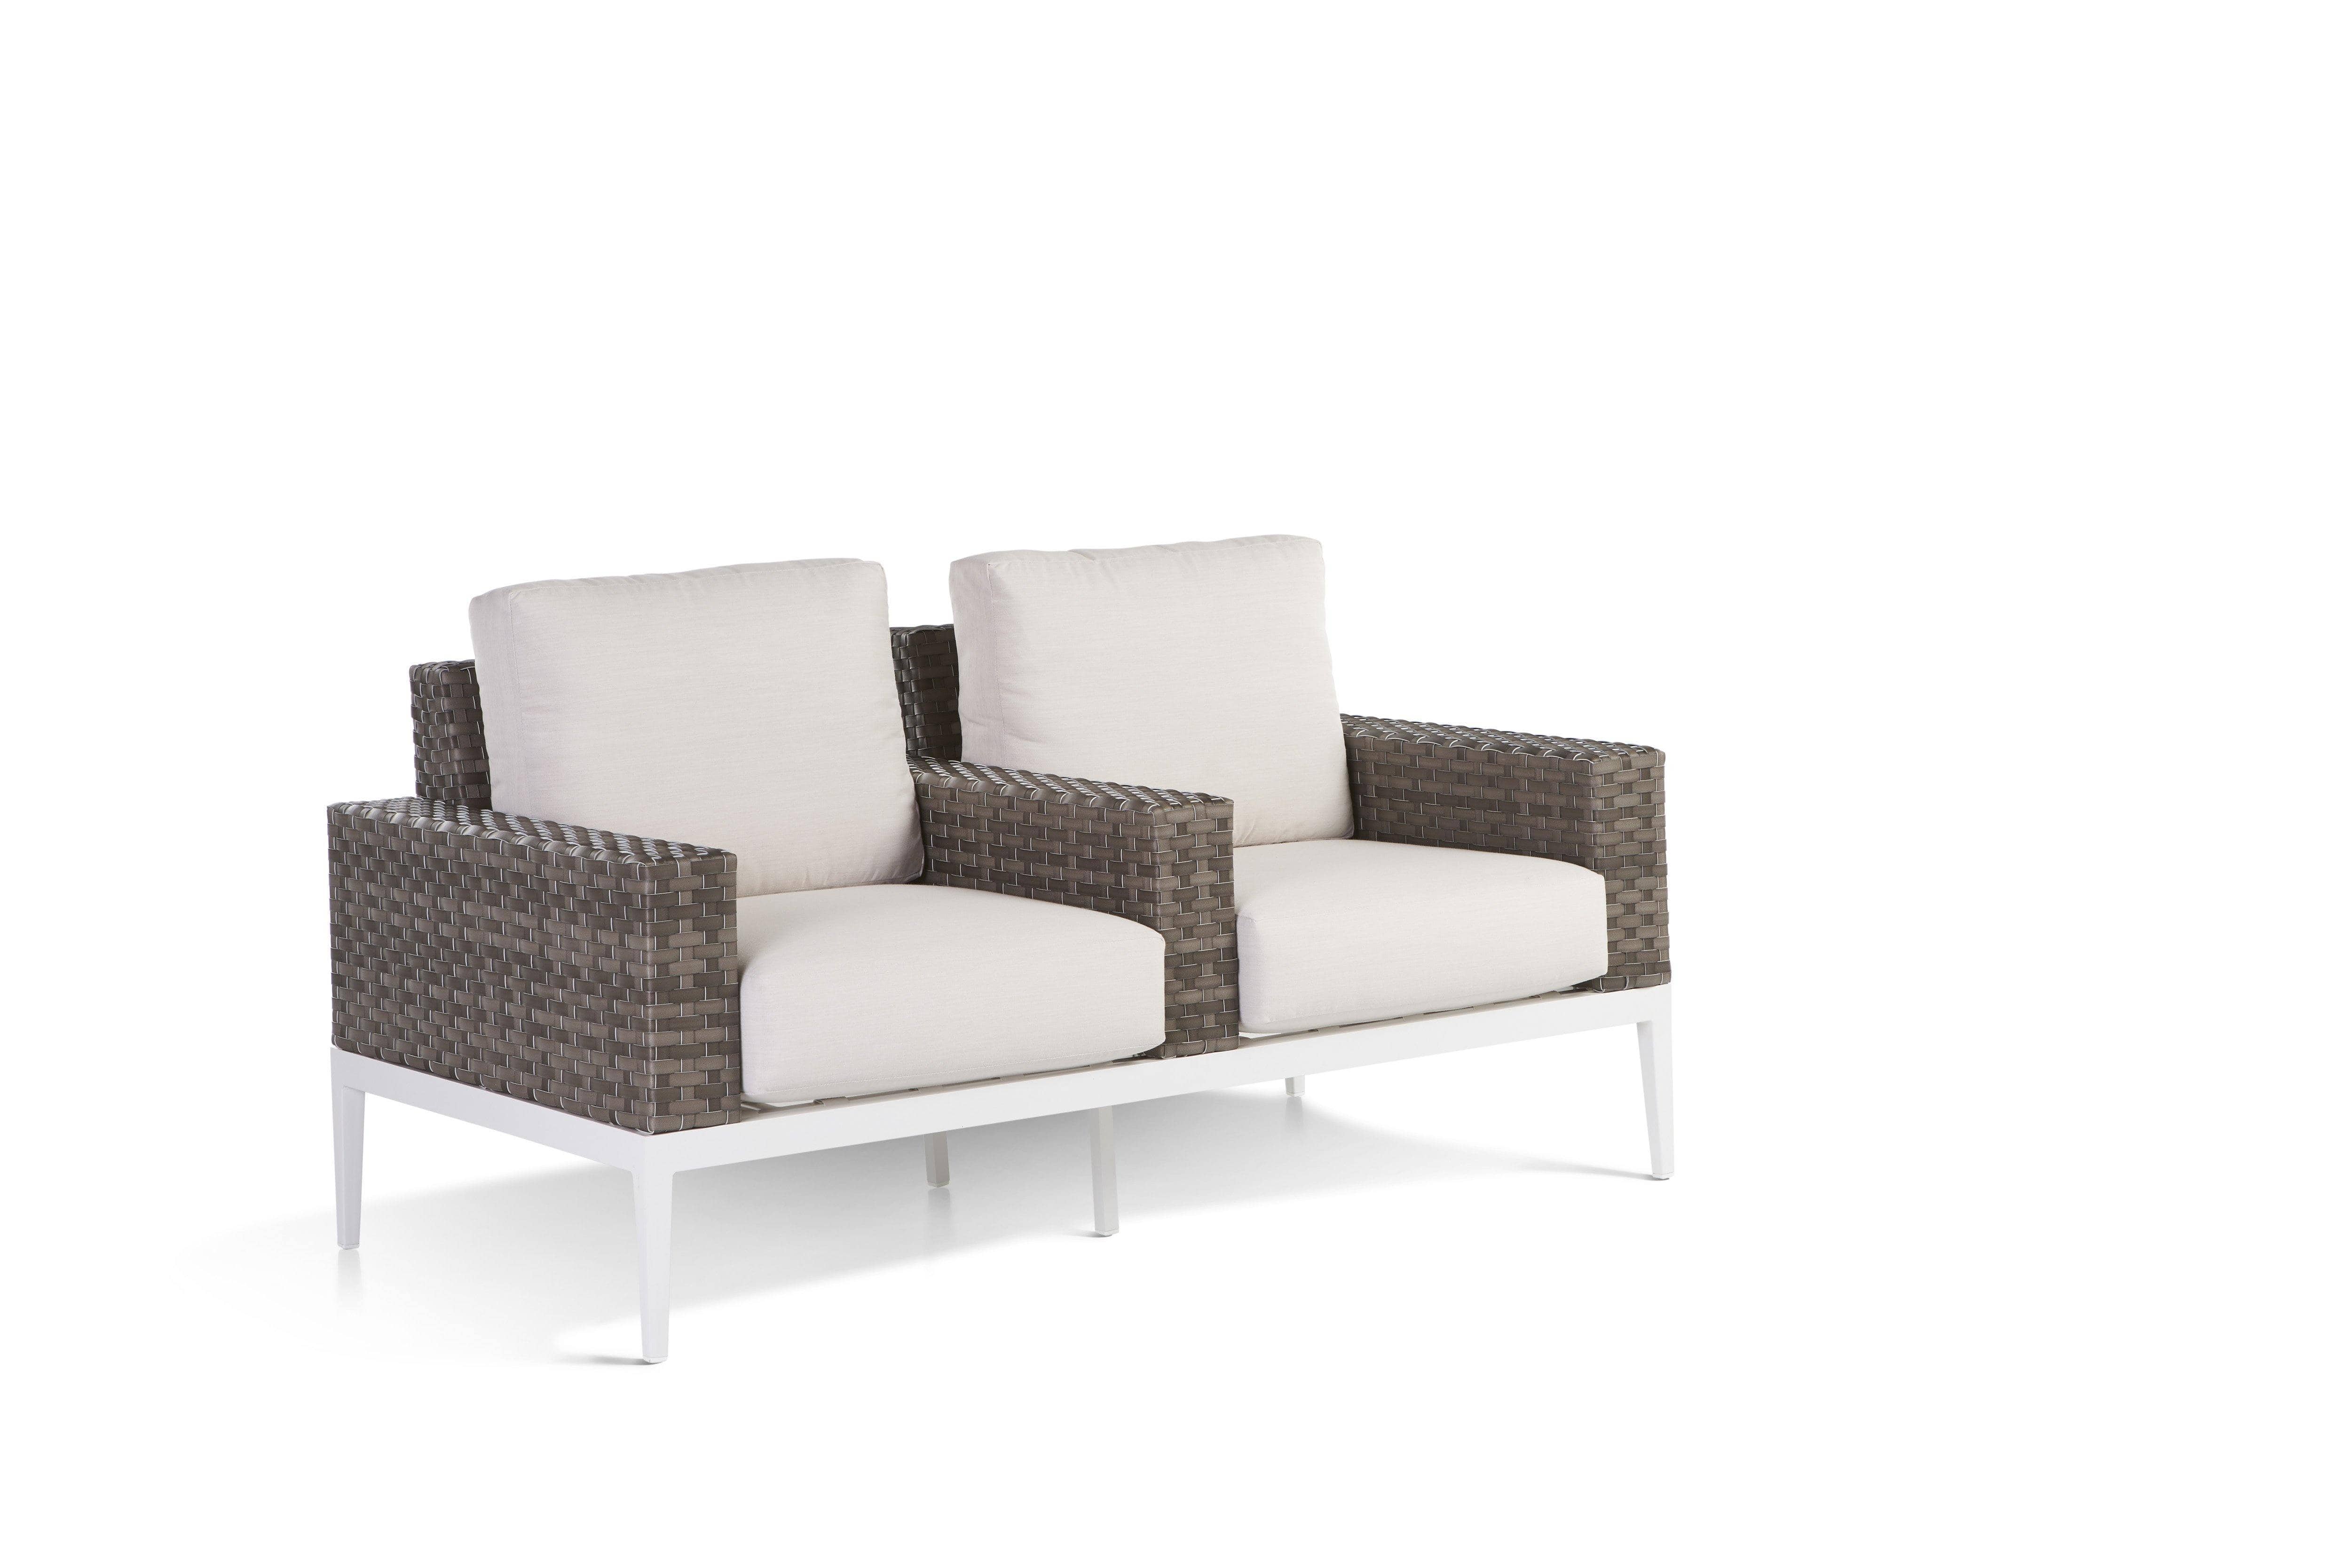 South Sea Outdoor Living Patio Furniture Stevie Theater-Style Loveseat by South Sea Outdoor Living - 73802-TH